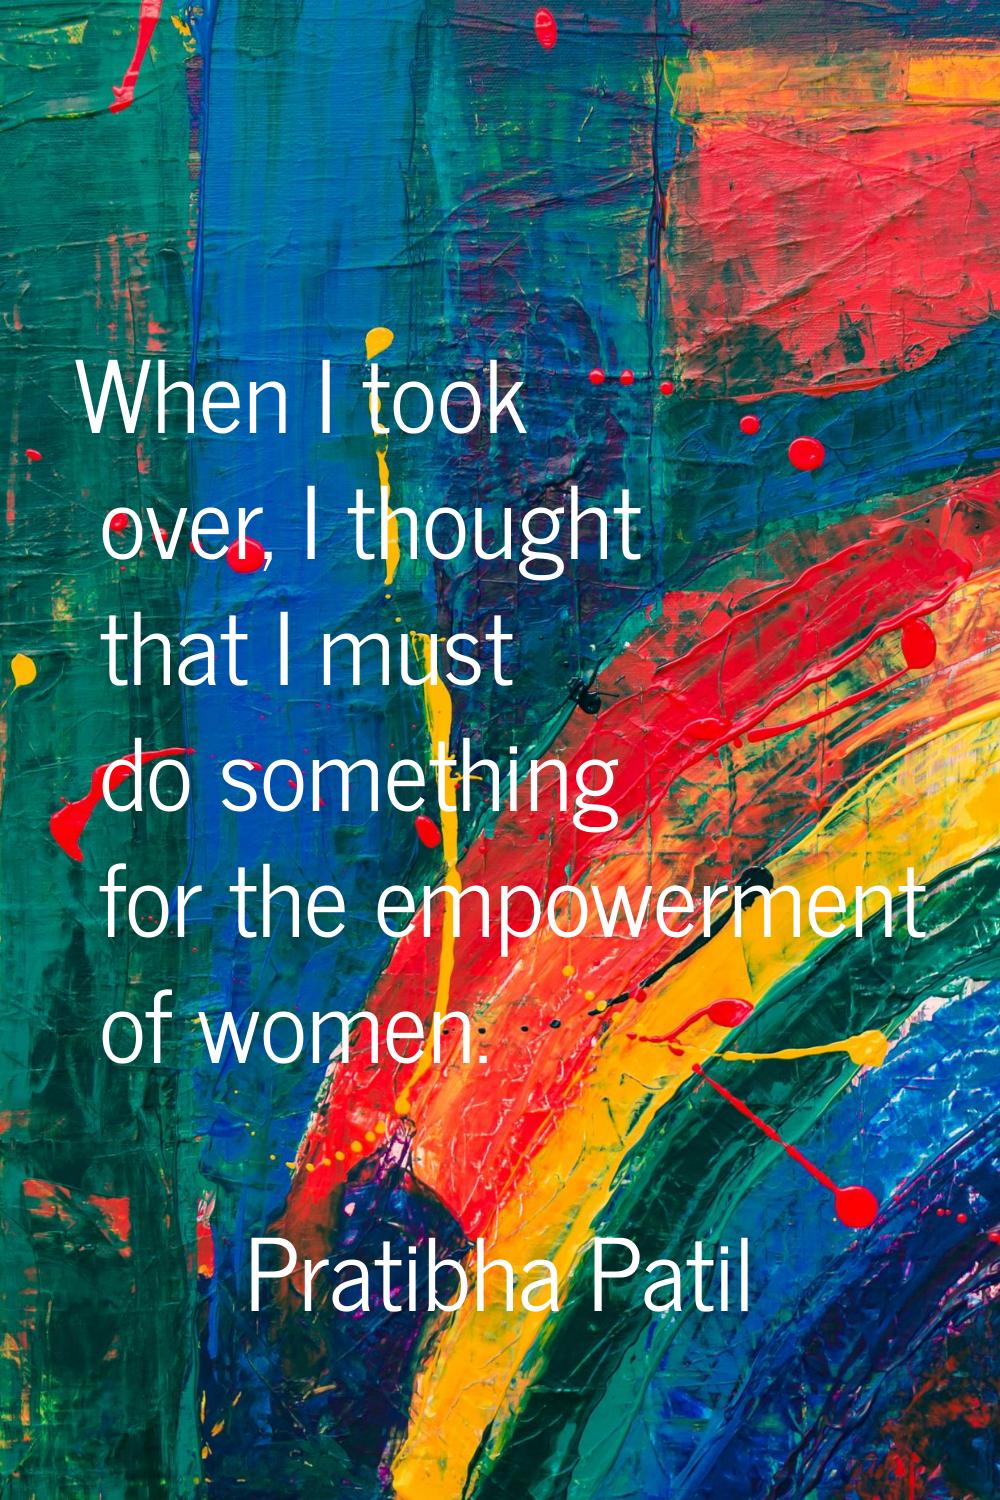 When I took over, I thought that I must do something for the empowerment of women.